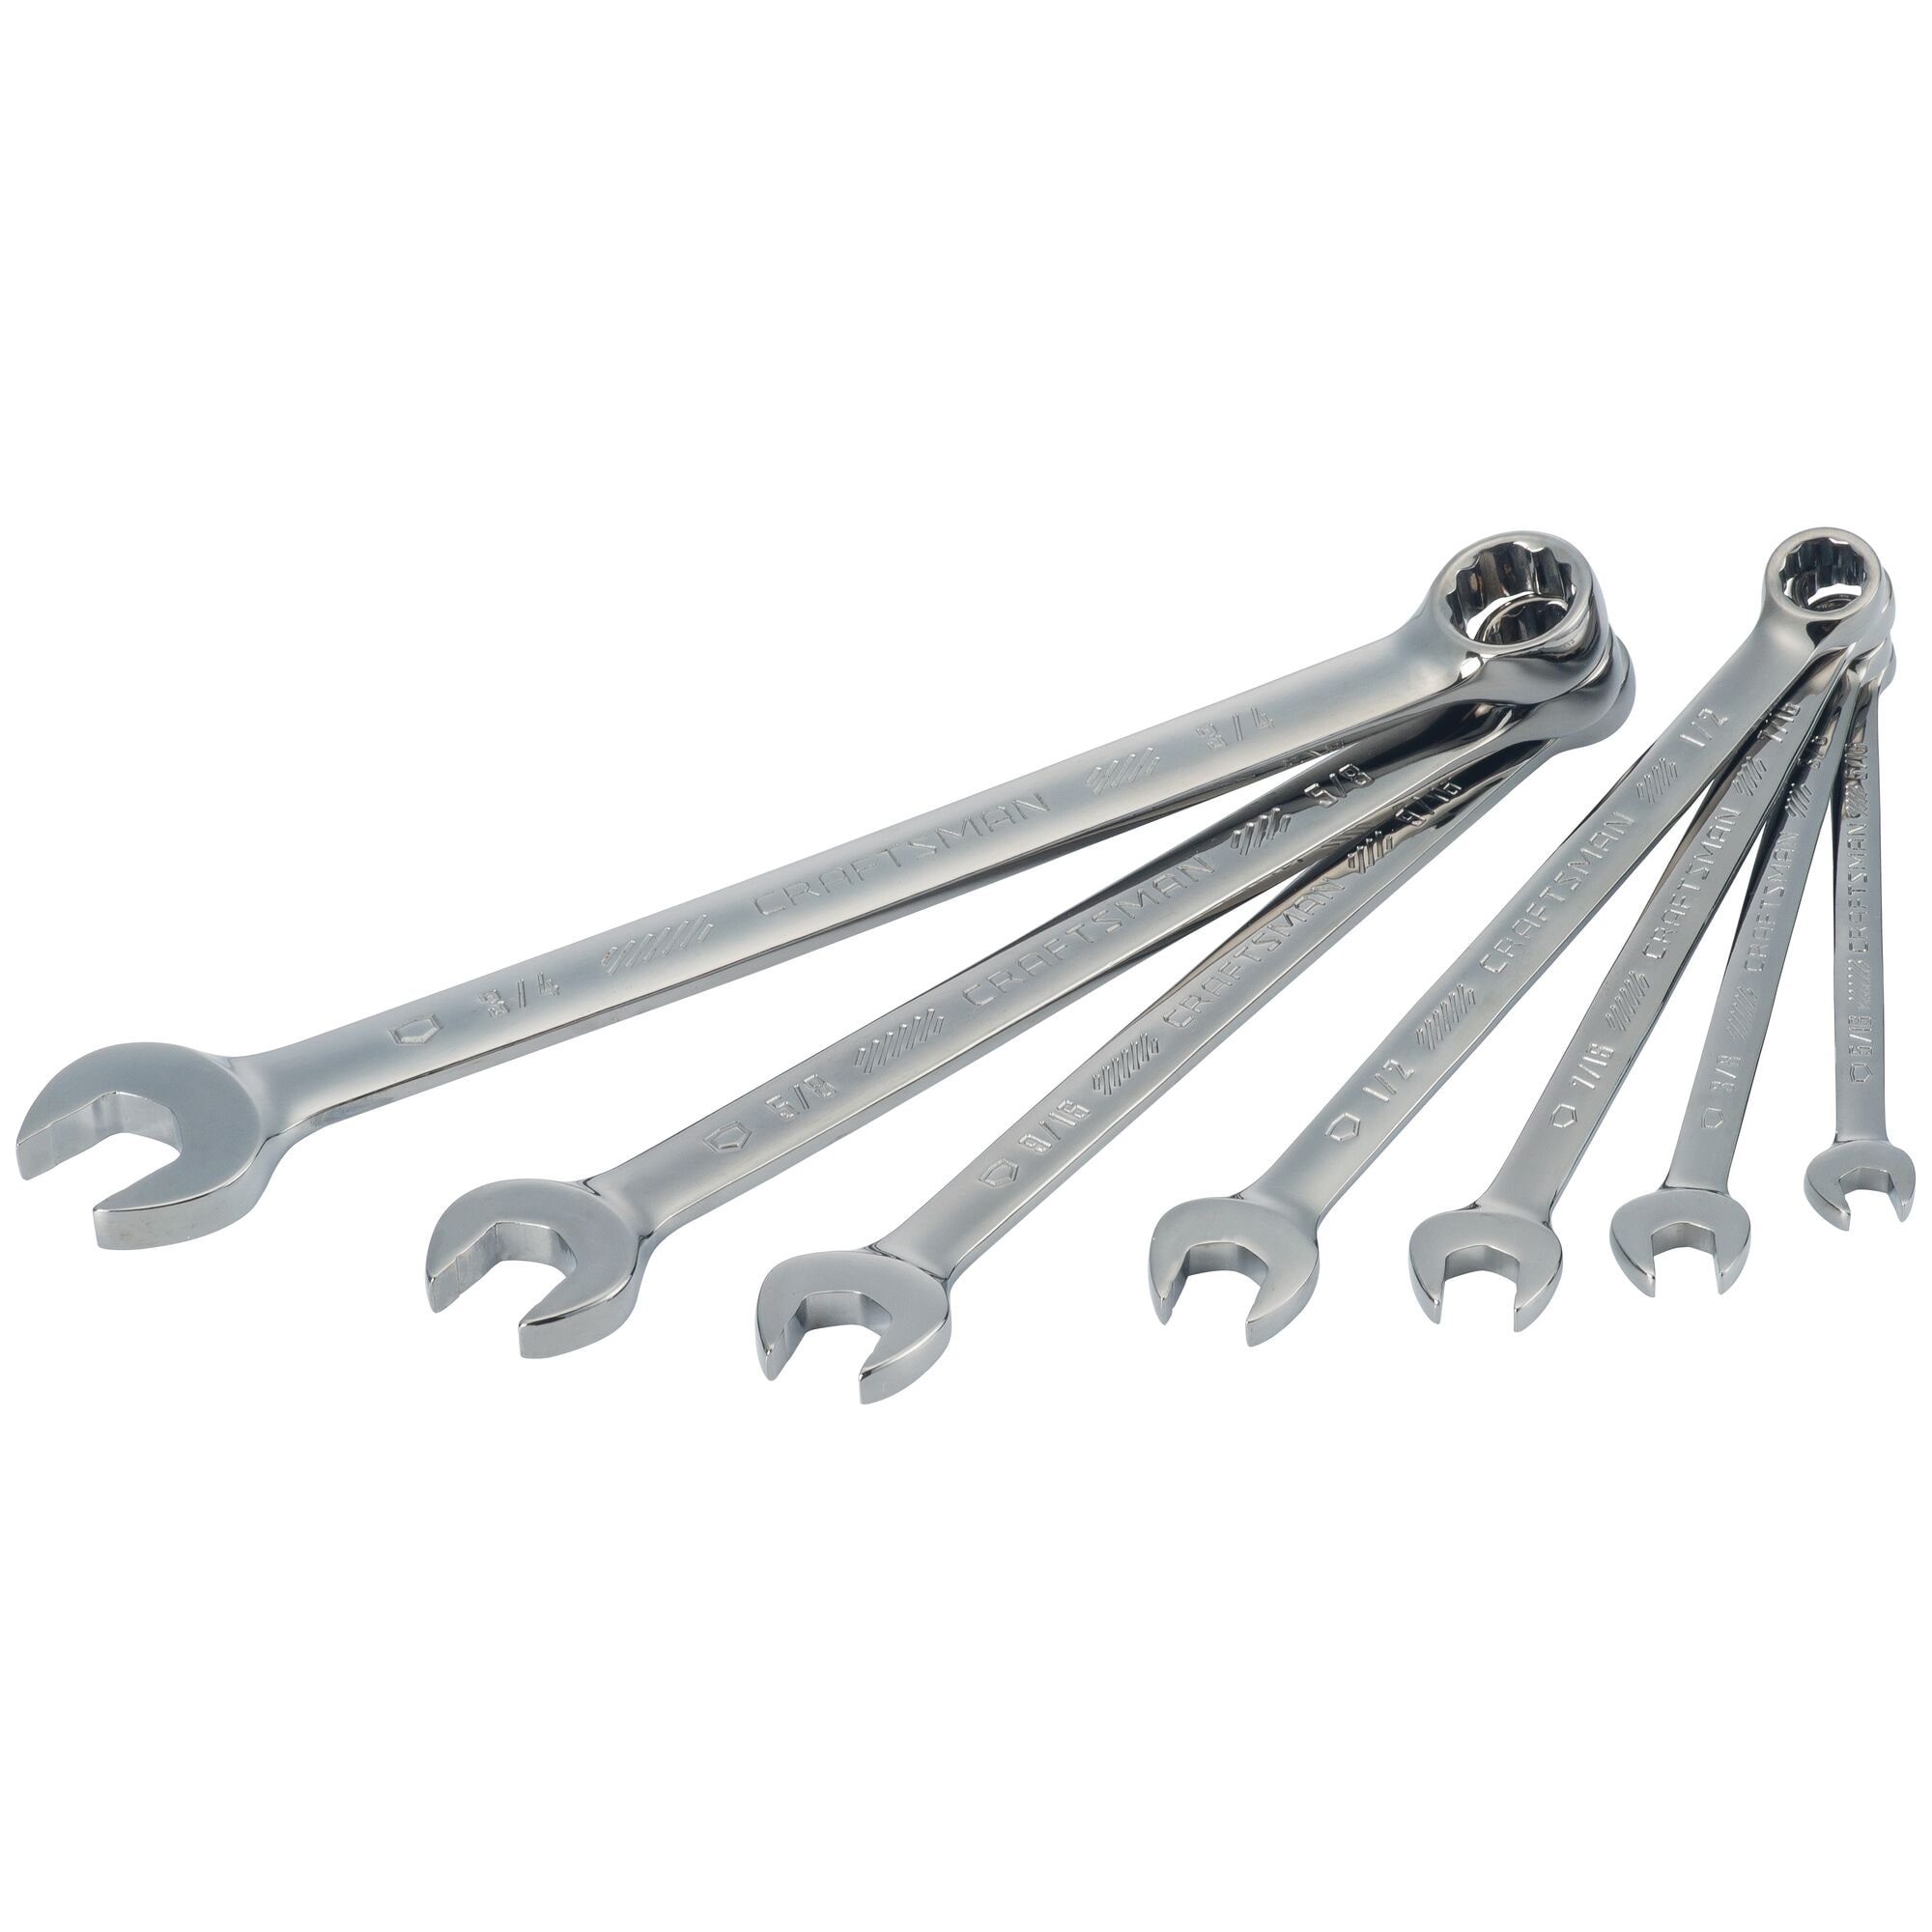 EGA Master - Combination Wrenches; Size (Inch): 7/8; Finish: Plain; Head  Type: Combination; Box End Type: 12-Point; Handle Type: Straight; Material:  Beryllium Copper - 03841103 - MSC Industrial Supply